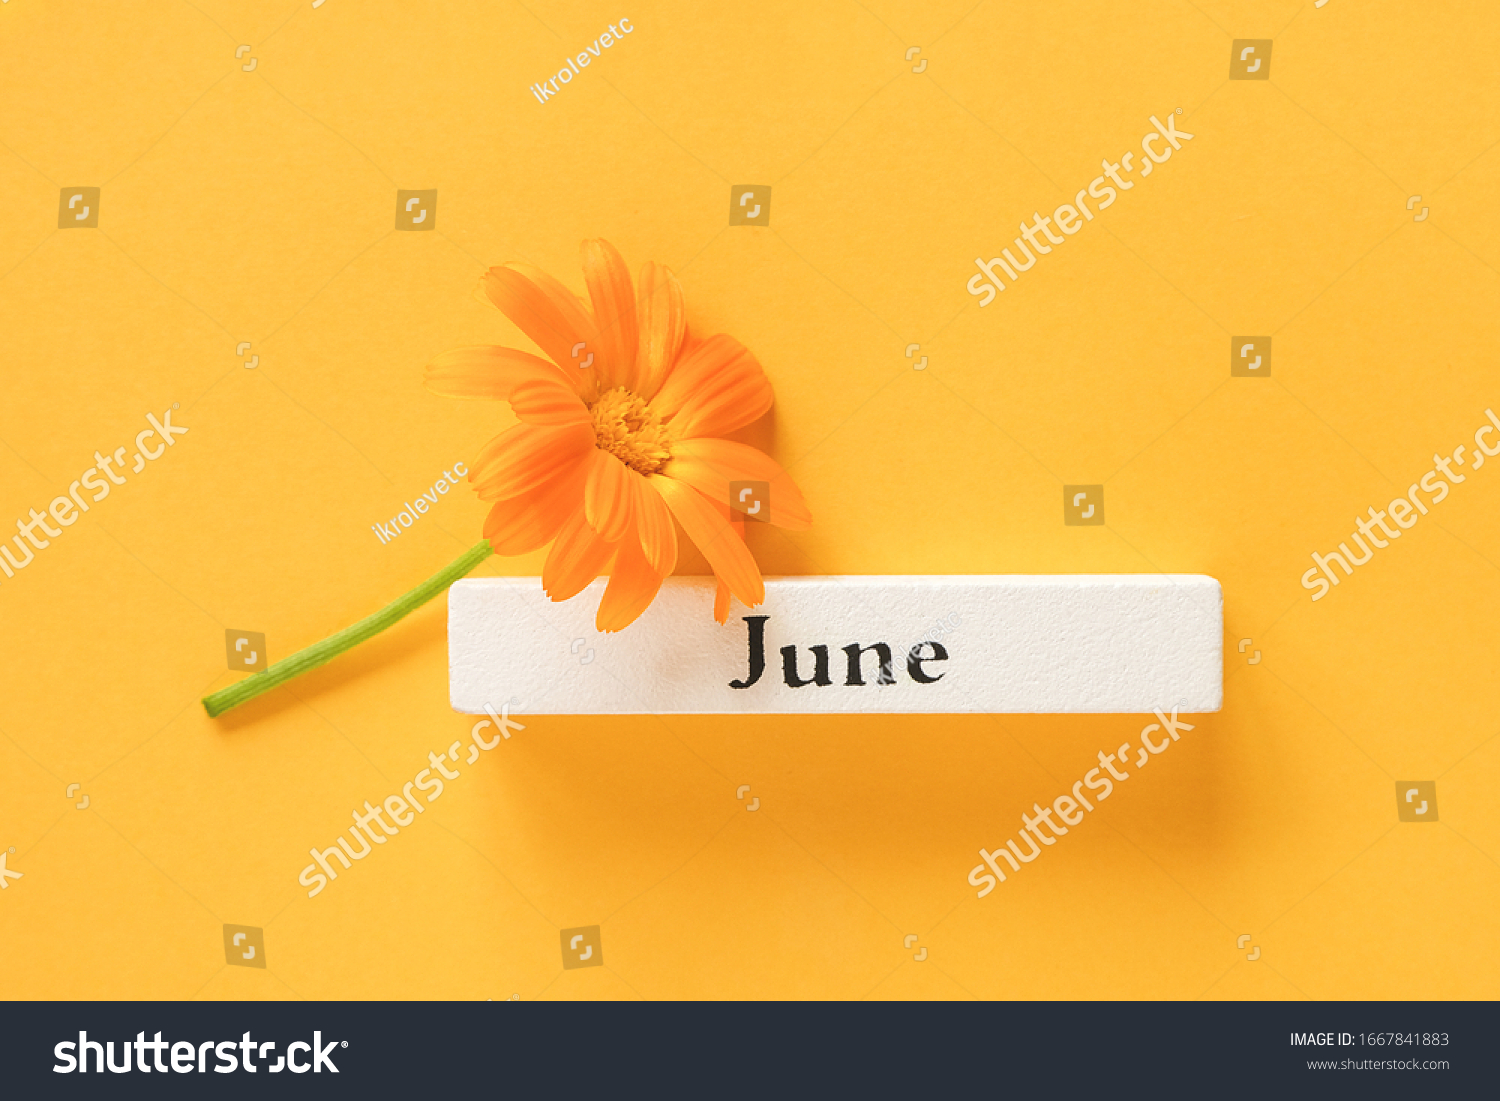 One orange calendula flower and calendar summer month June on yellow background. Top view Copy space Flat lay Minimal style. Concept Hello June Template for your design, greeting card. #1667841883